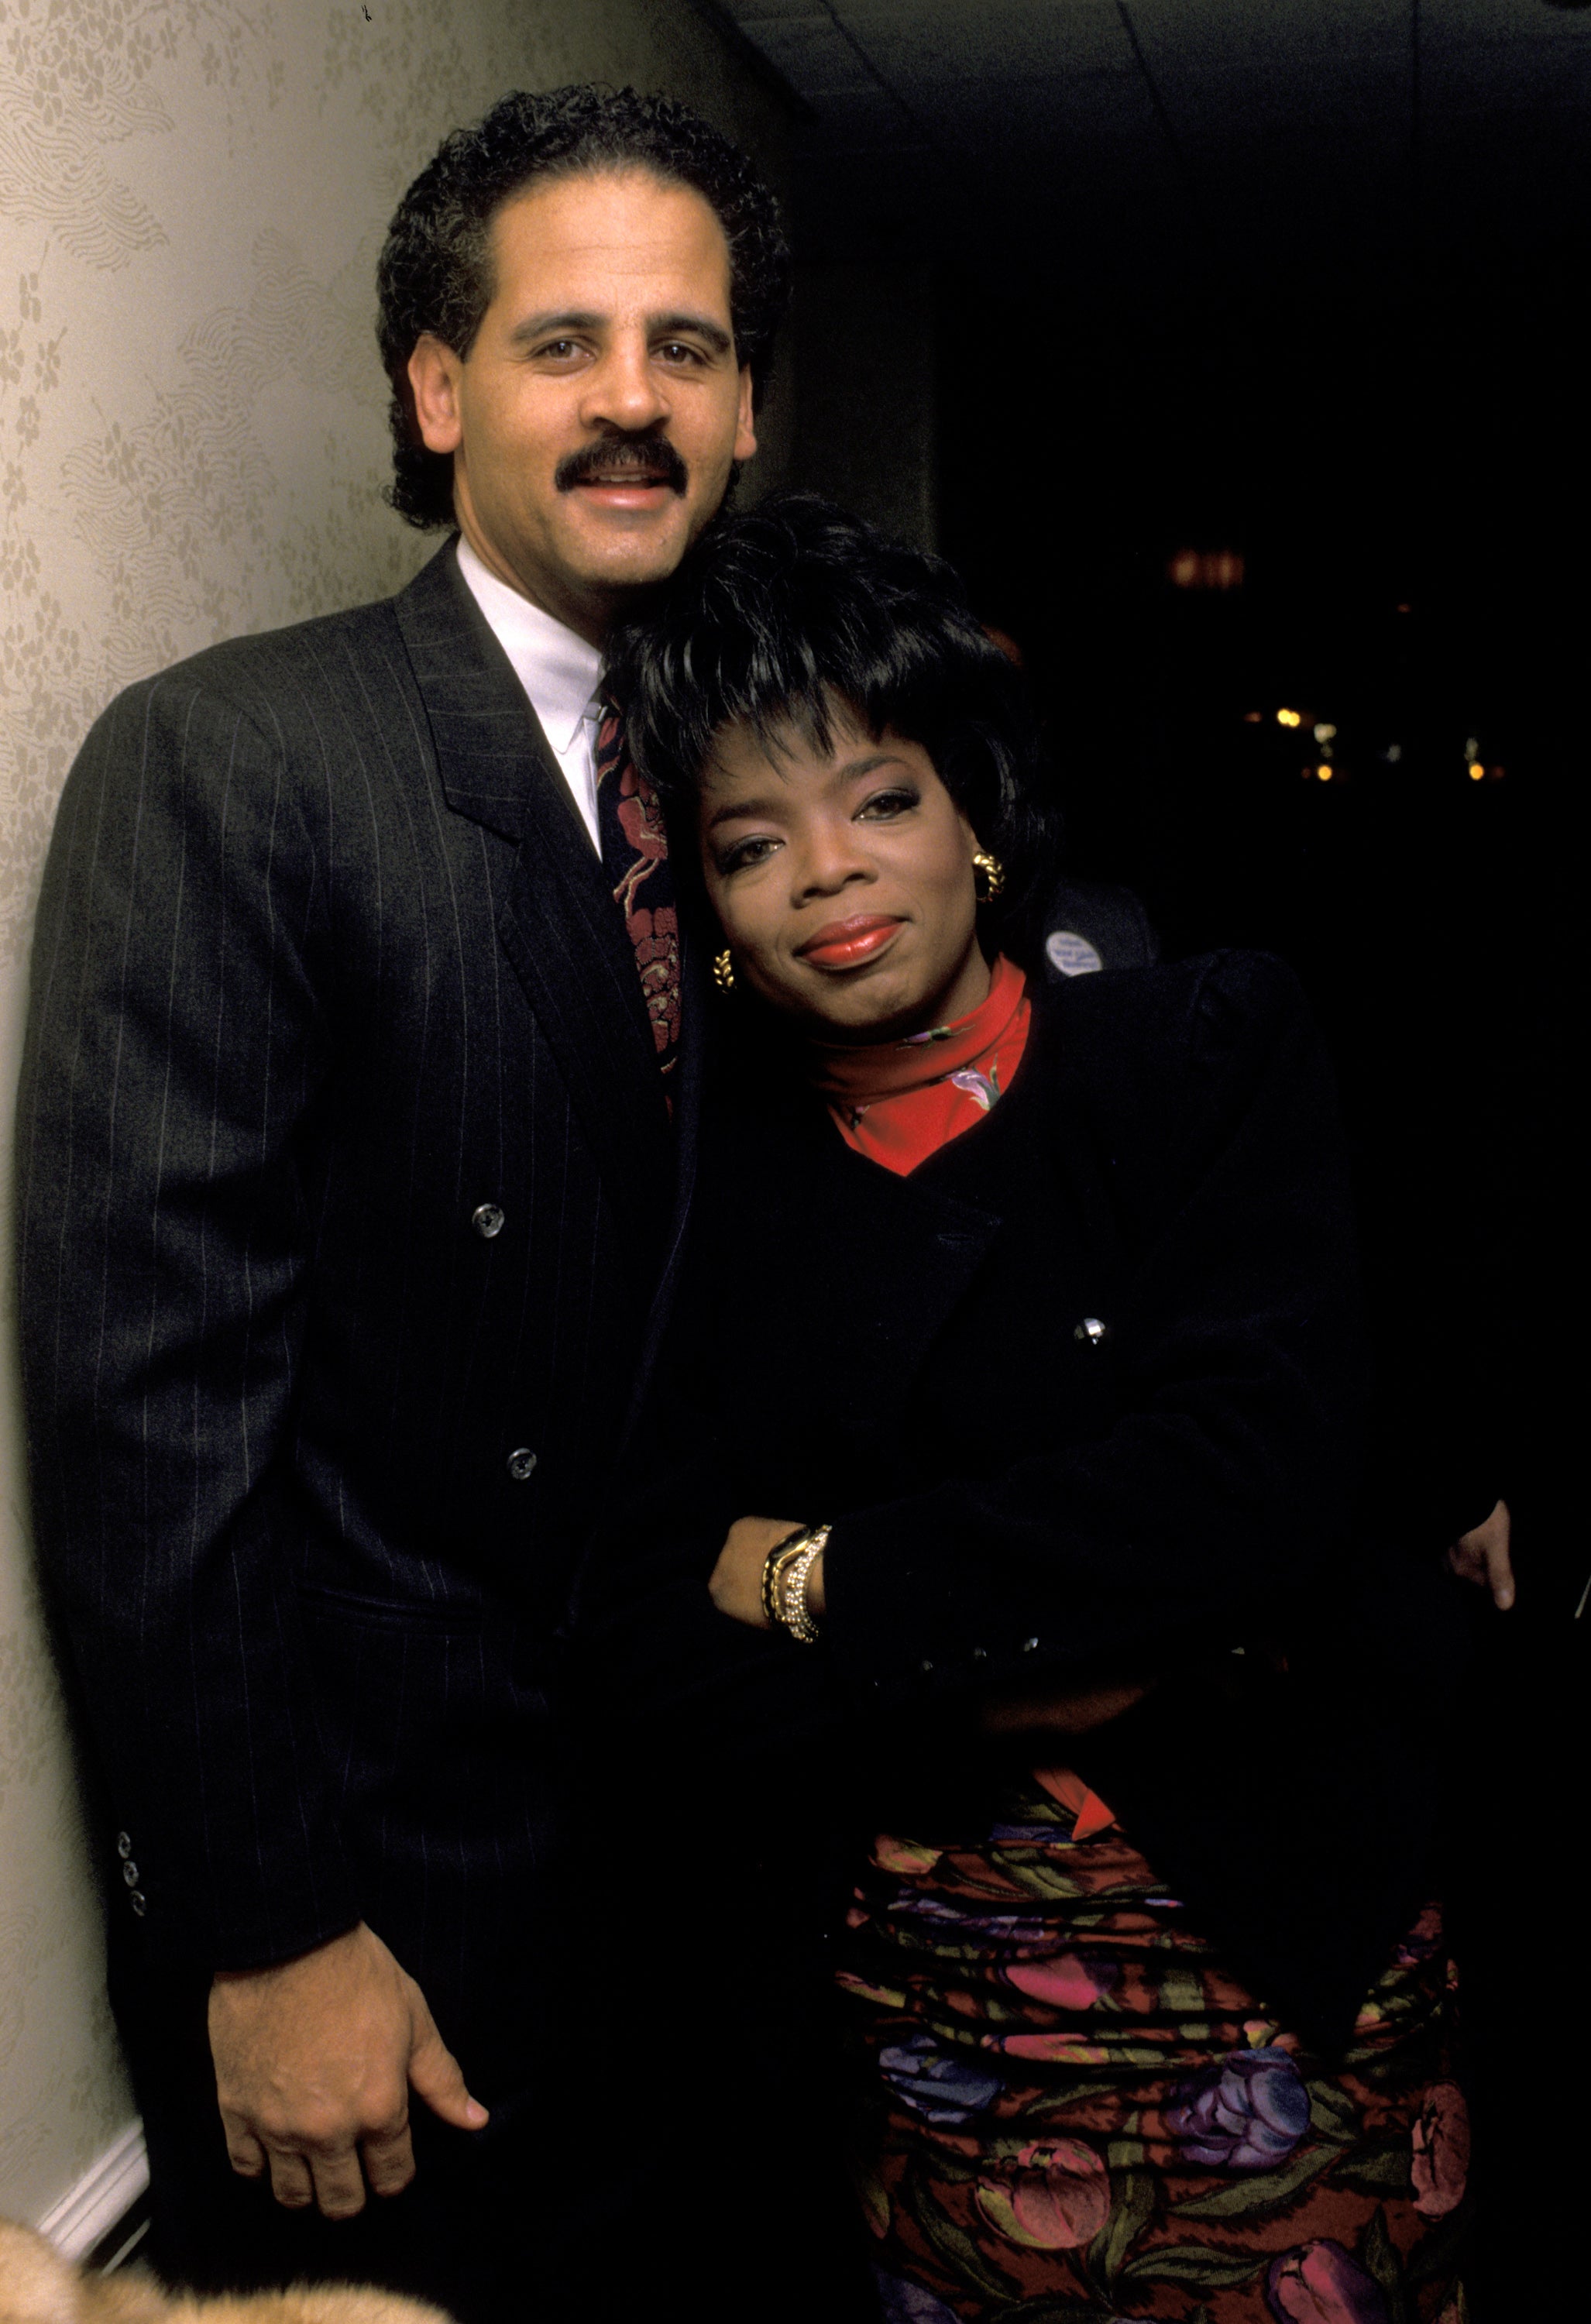 22 Iconic Photos Of Oprah And Stedman's Love Through The Years
